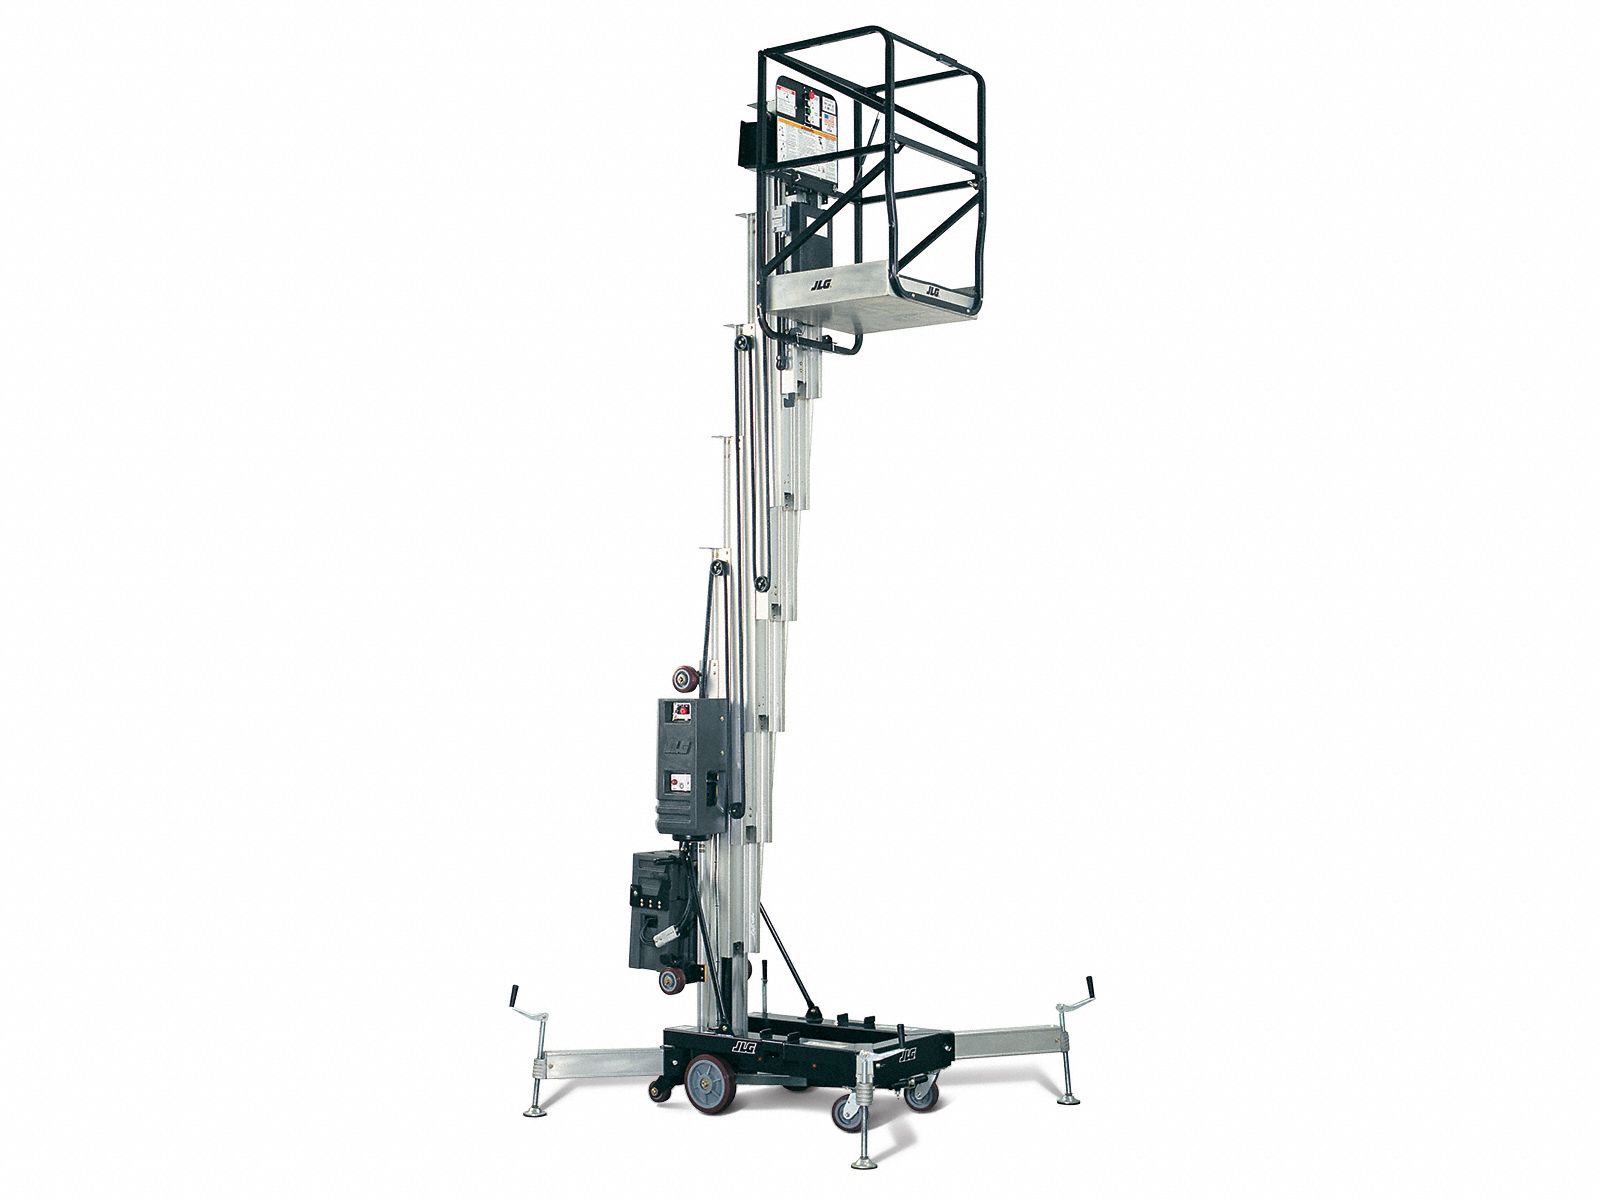 Personnel Lift: Push-Around, 300 lb Load Capacity, 44 ft Max. Work Ht